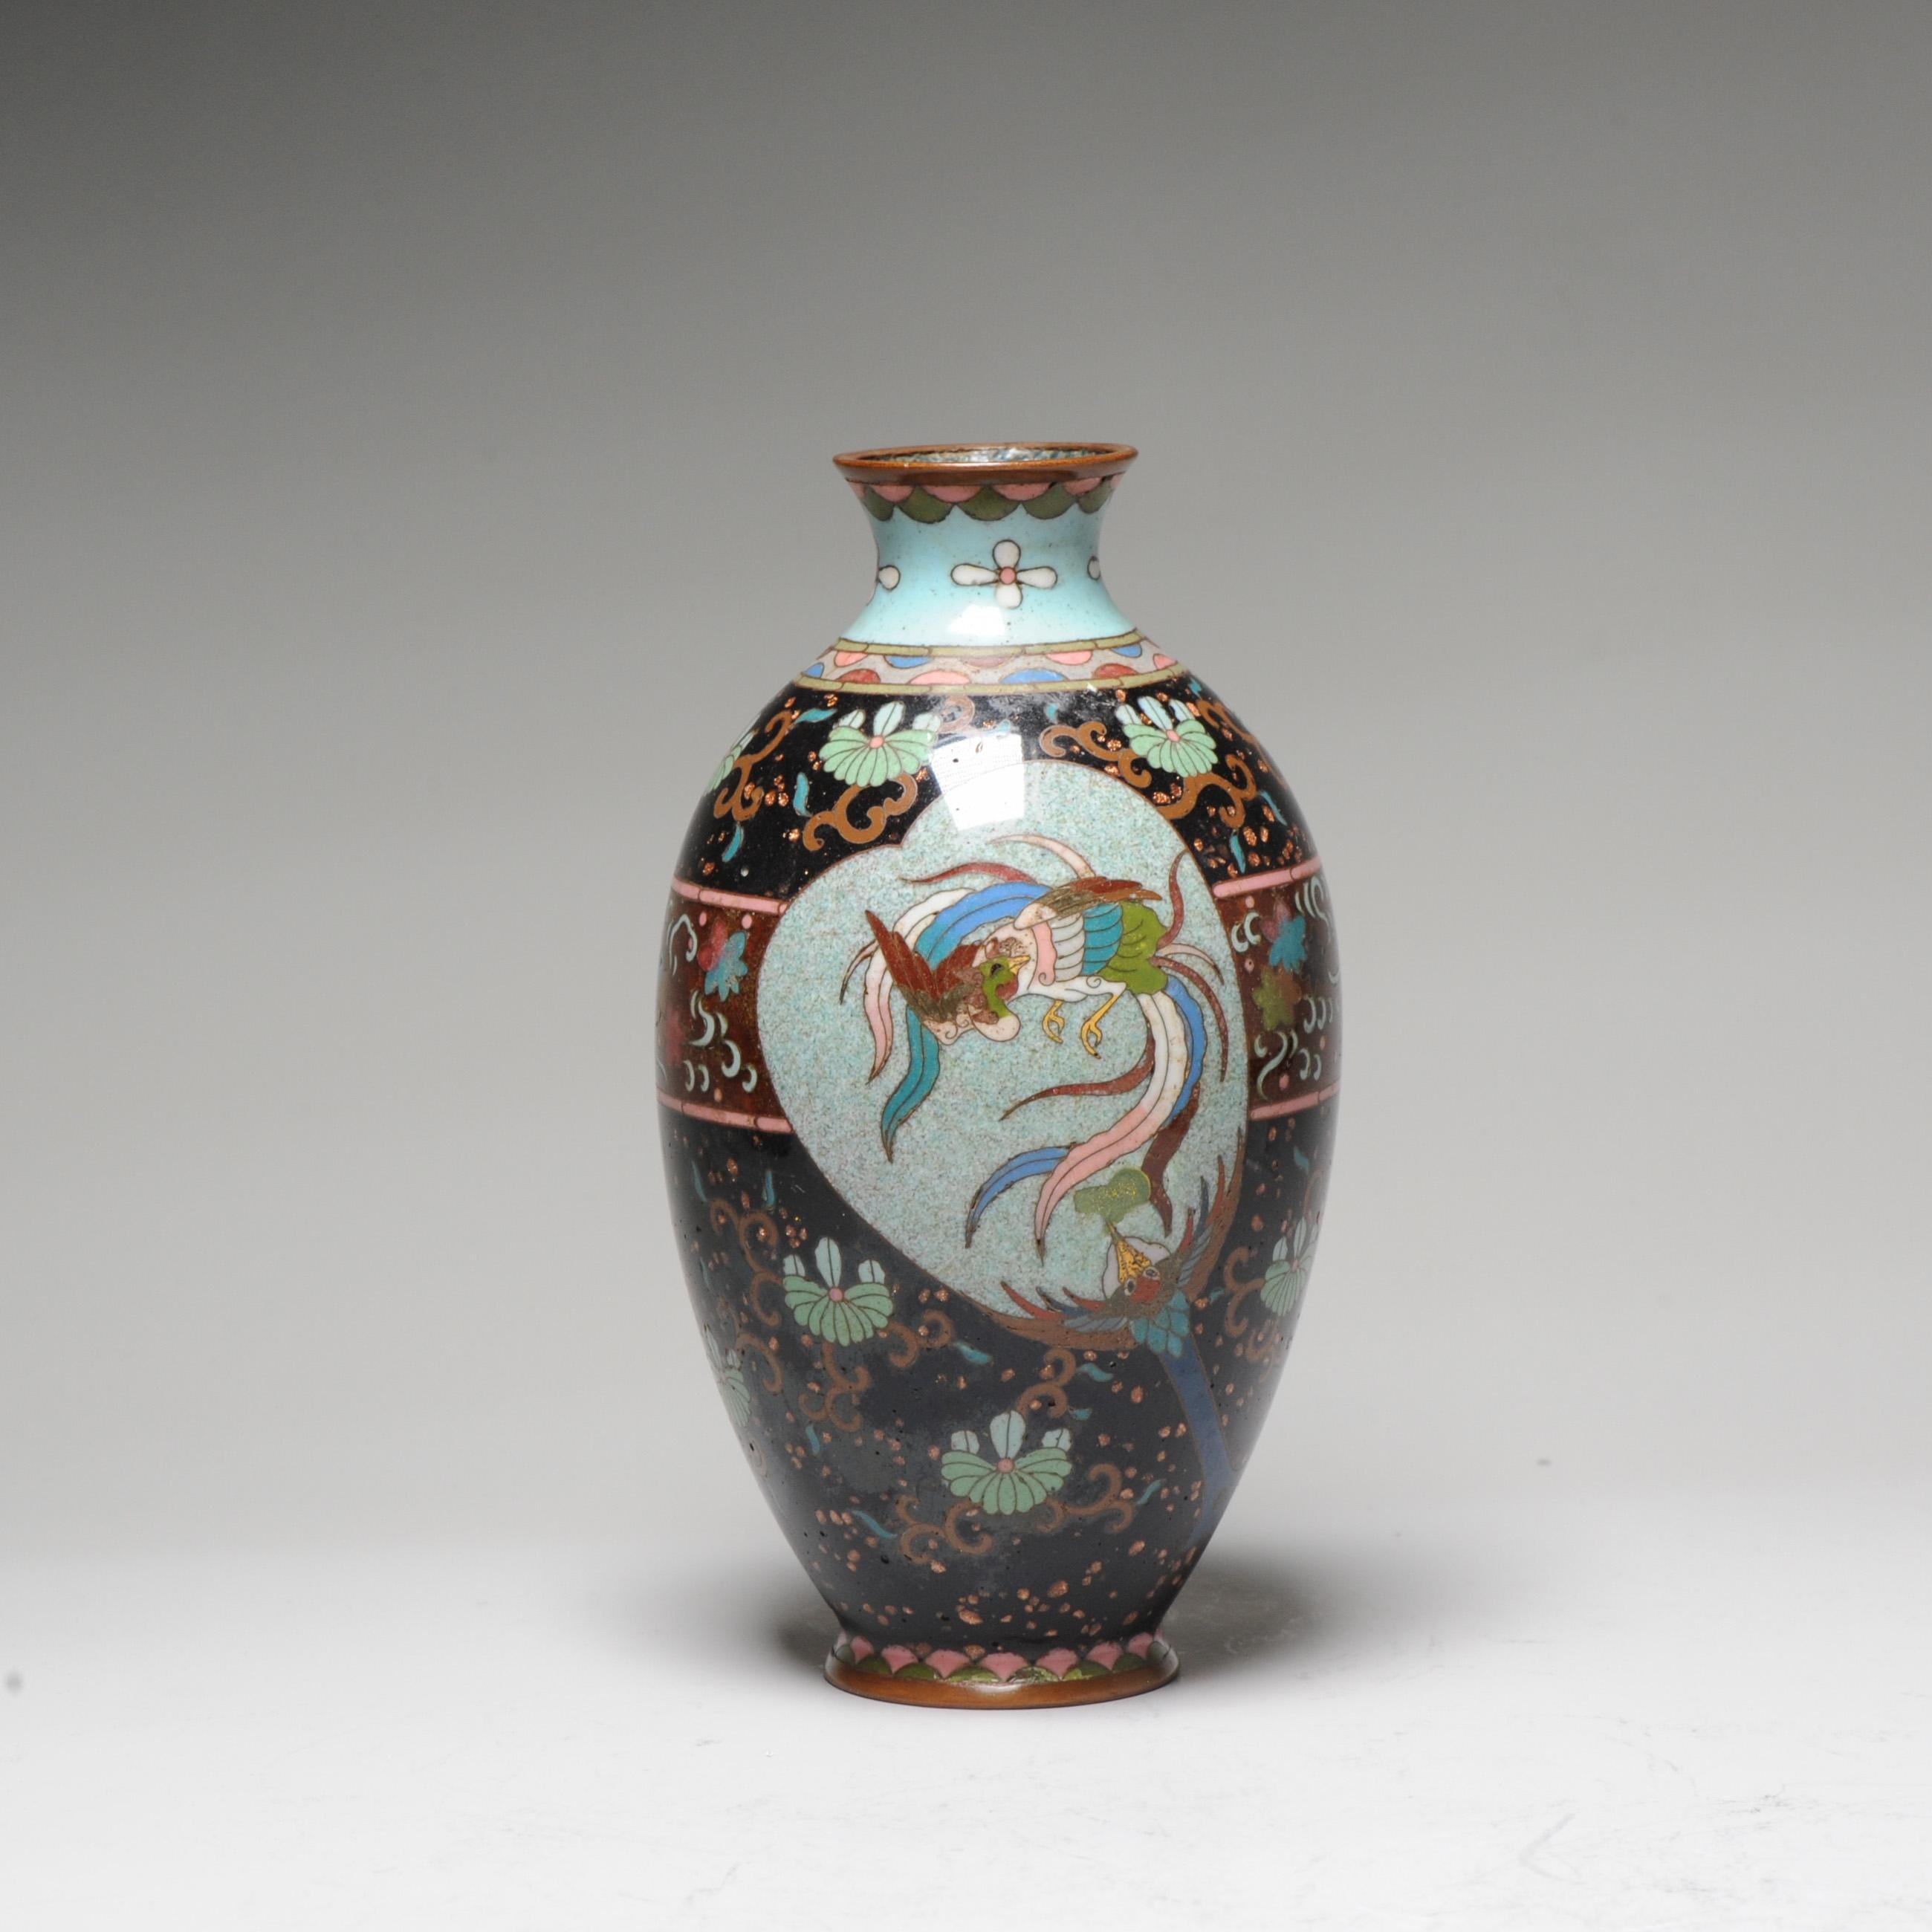 Description

Lovely and beautifully made piece. With a stunning scene

Provenance:

Originally part of the Catherina collection of Japanese bronzes and cloisonne that was partly auctioned in Amsterdam in 2006 at Sothebys. Some pieces are